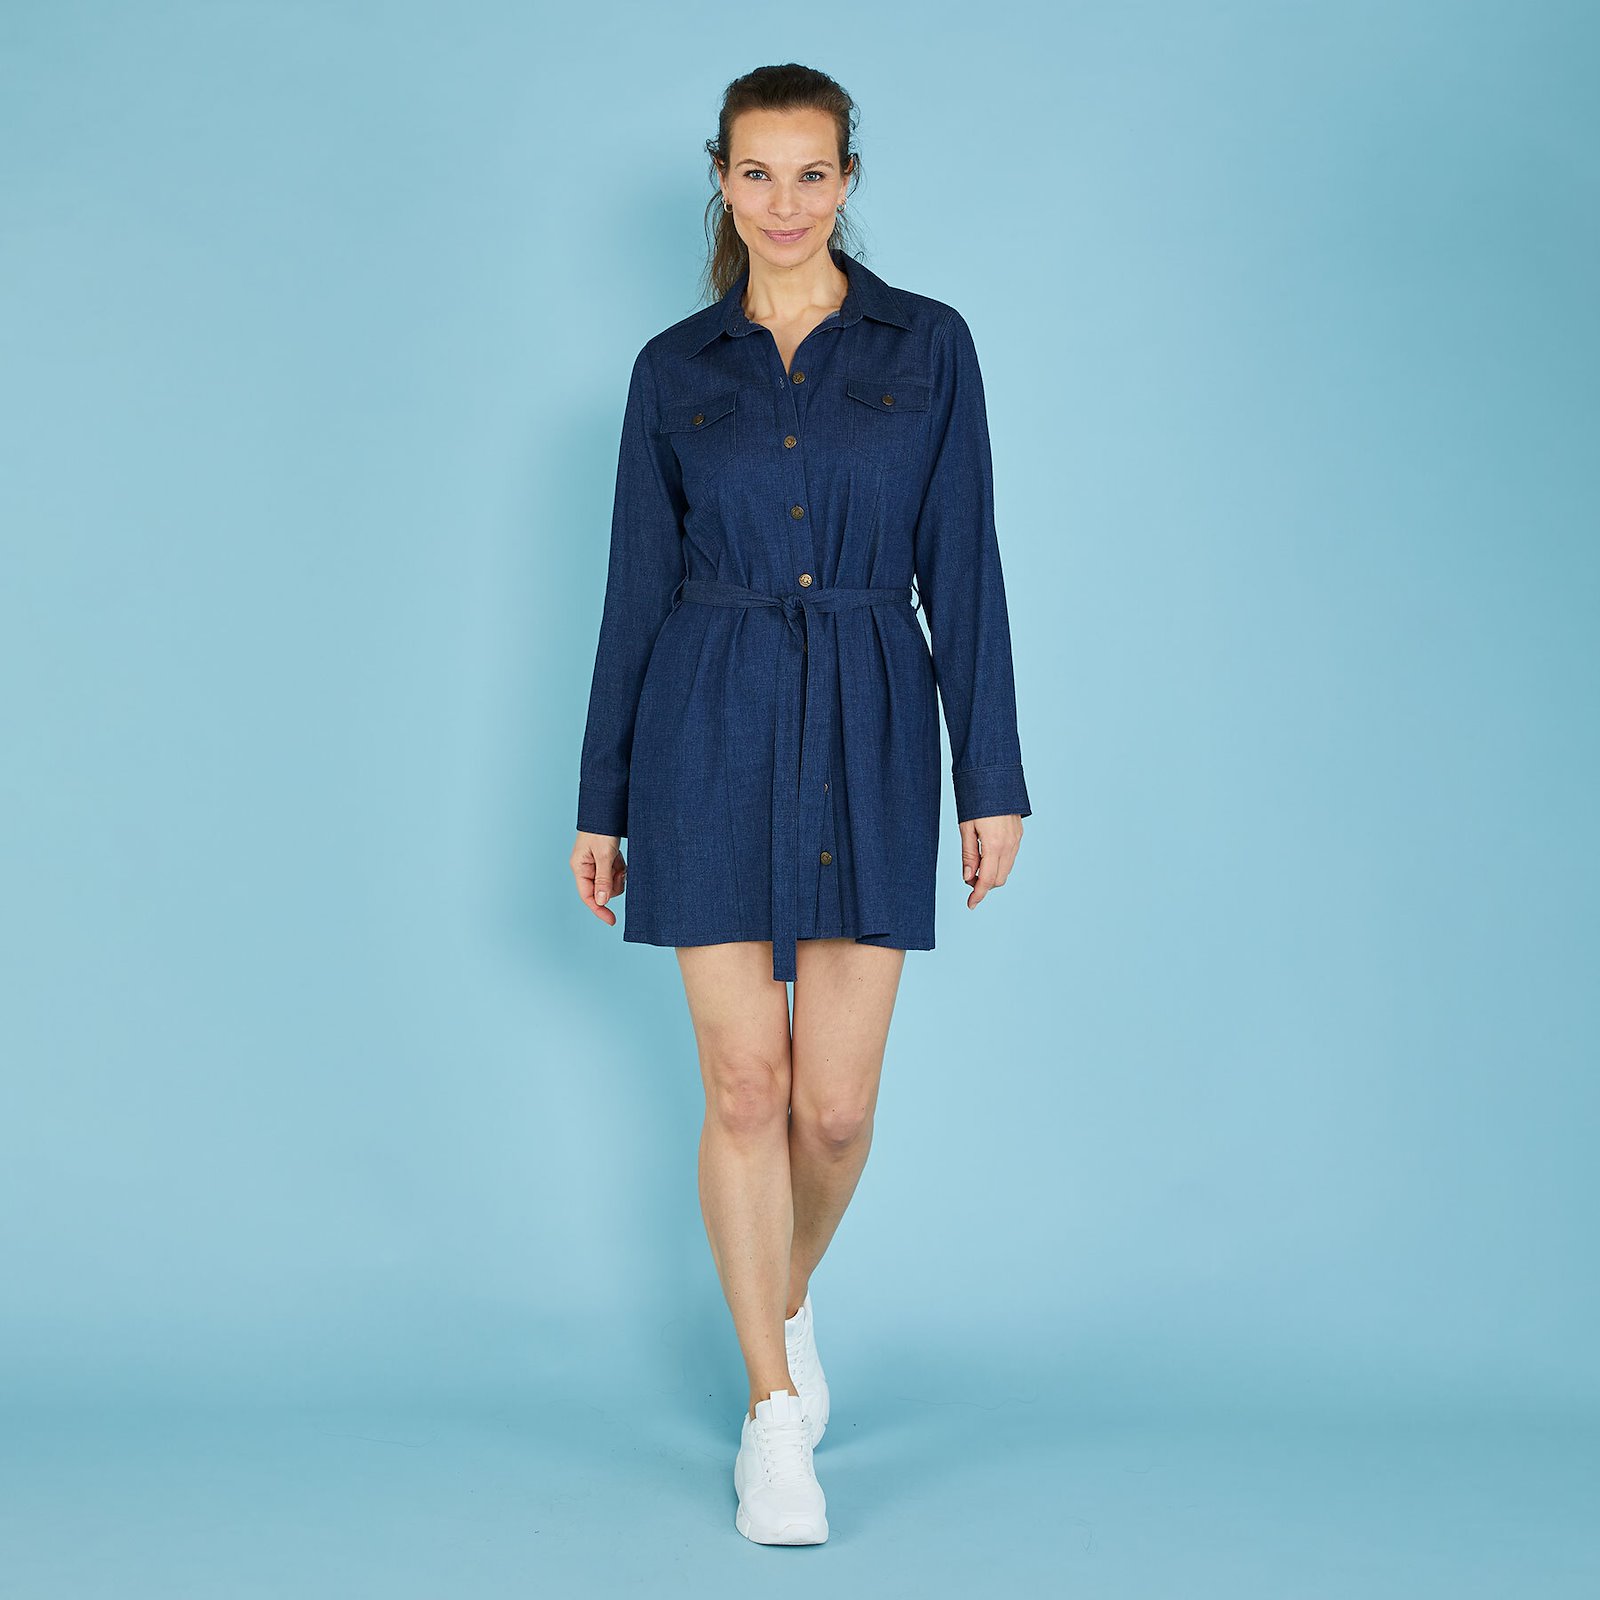 Fitted shirt dress with tie belt 6-18 p23176000_p23176001_p23176002_p23176003_p23176004_pack_d